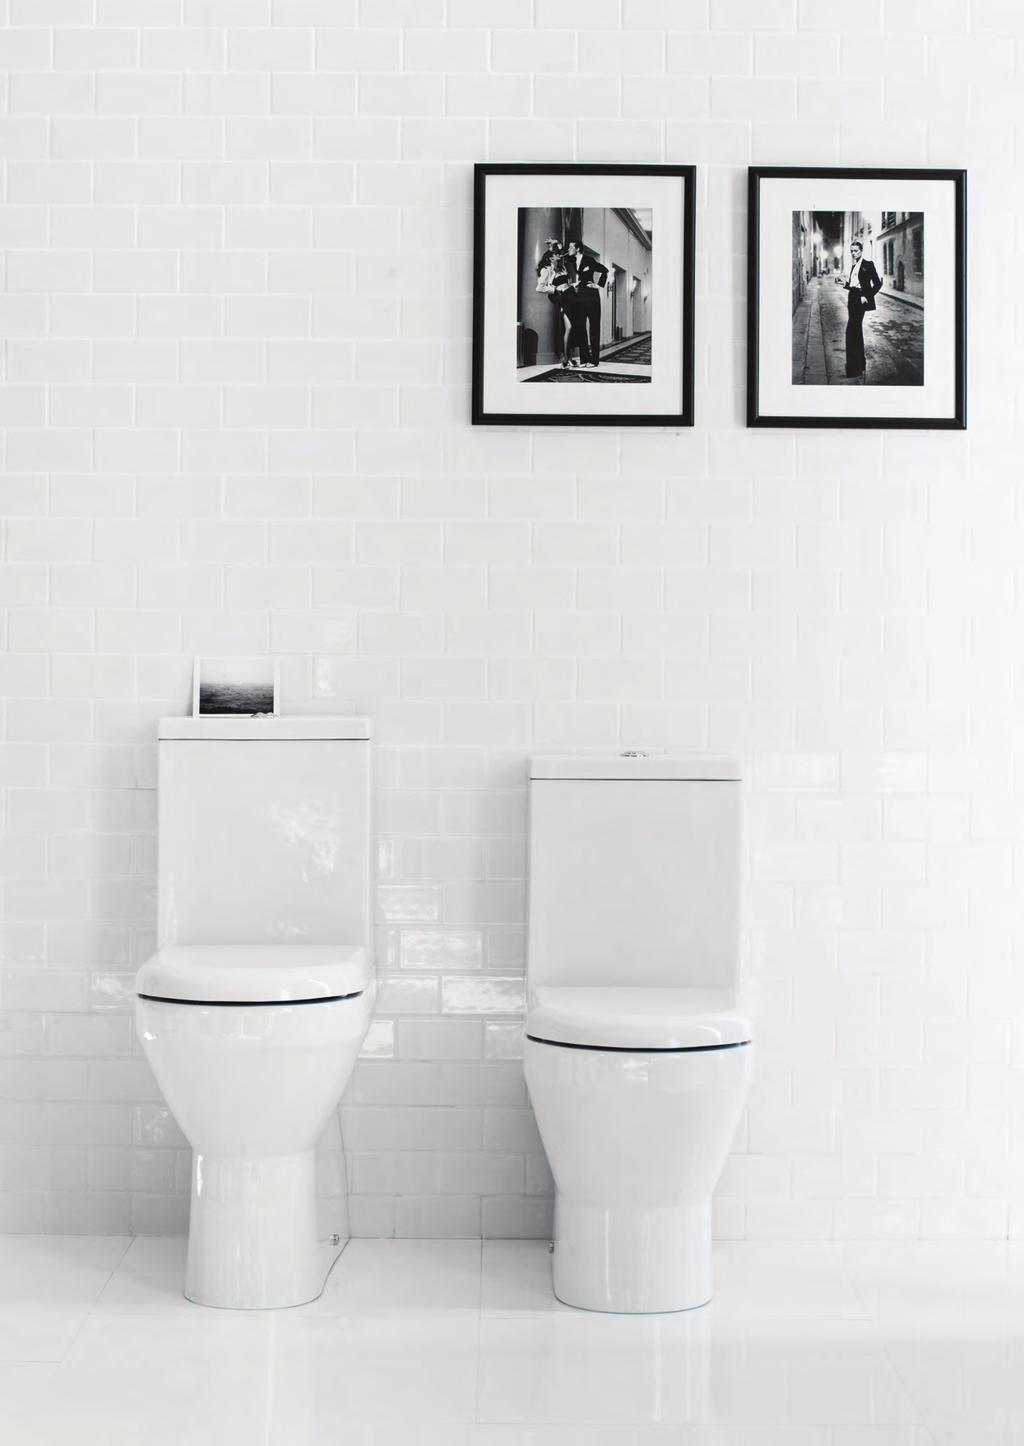 CERAMICS CERAMICS THE TALL OPTION As Britton ceramics are designed to be completely modular, you have the option to pair the round fronted Tall pedestal design with any basin style.